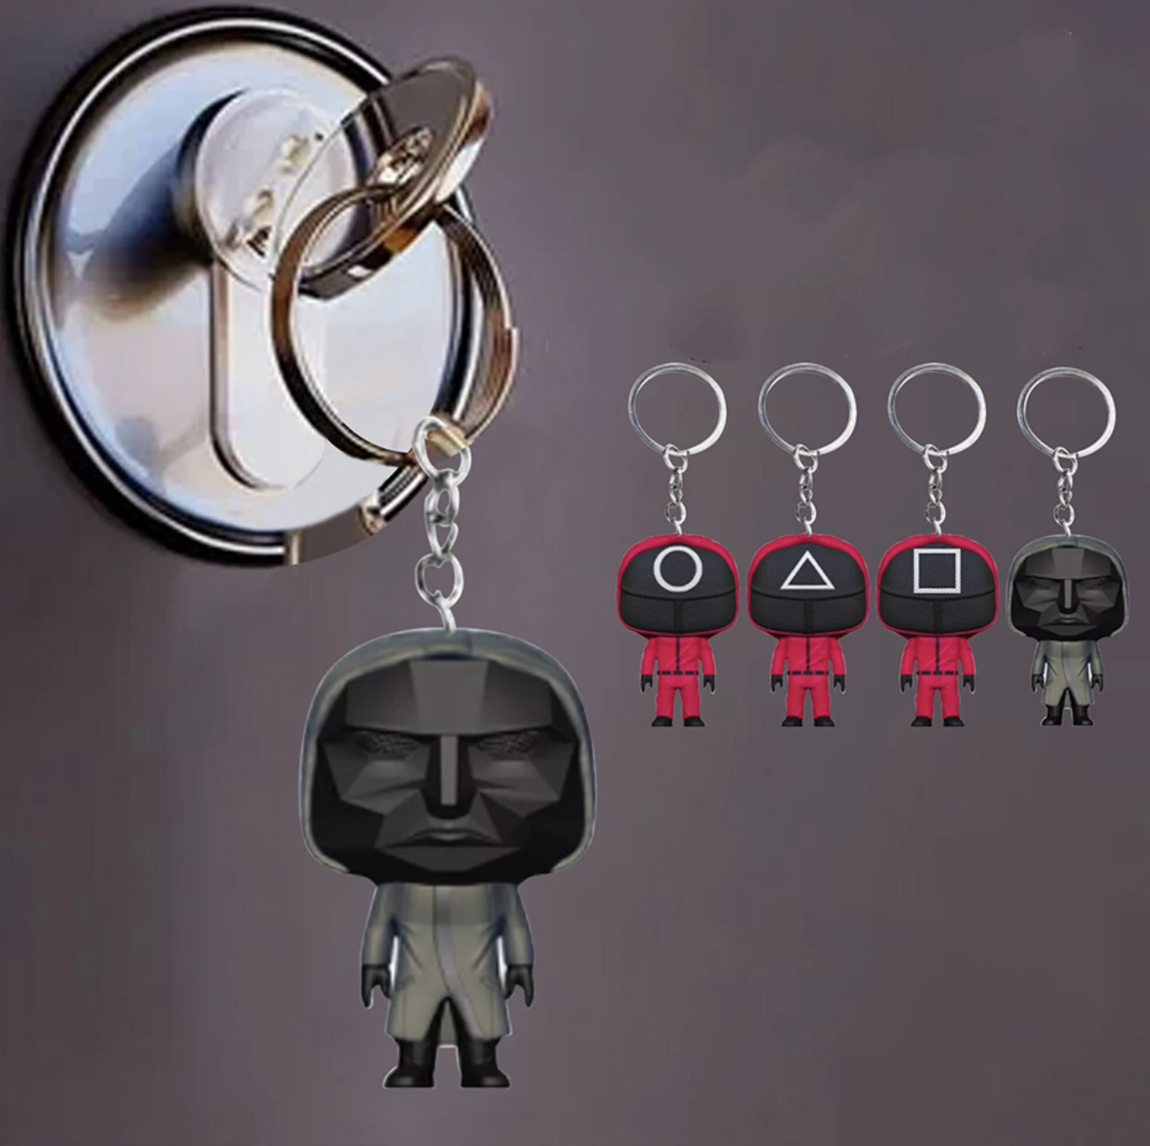 Keychains of Squid Game front man and guards